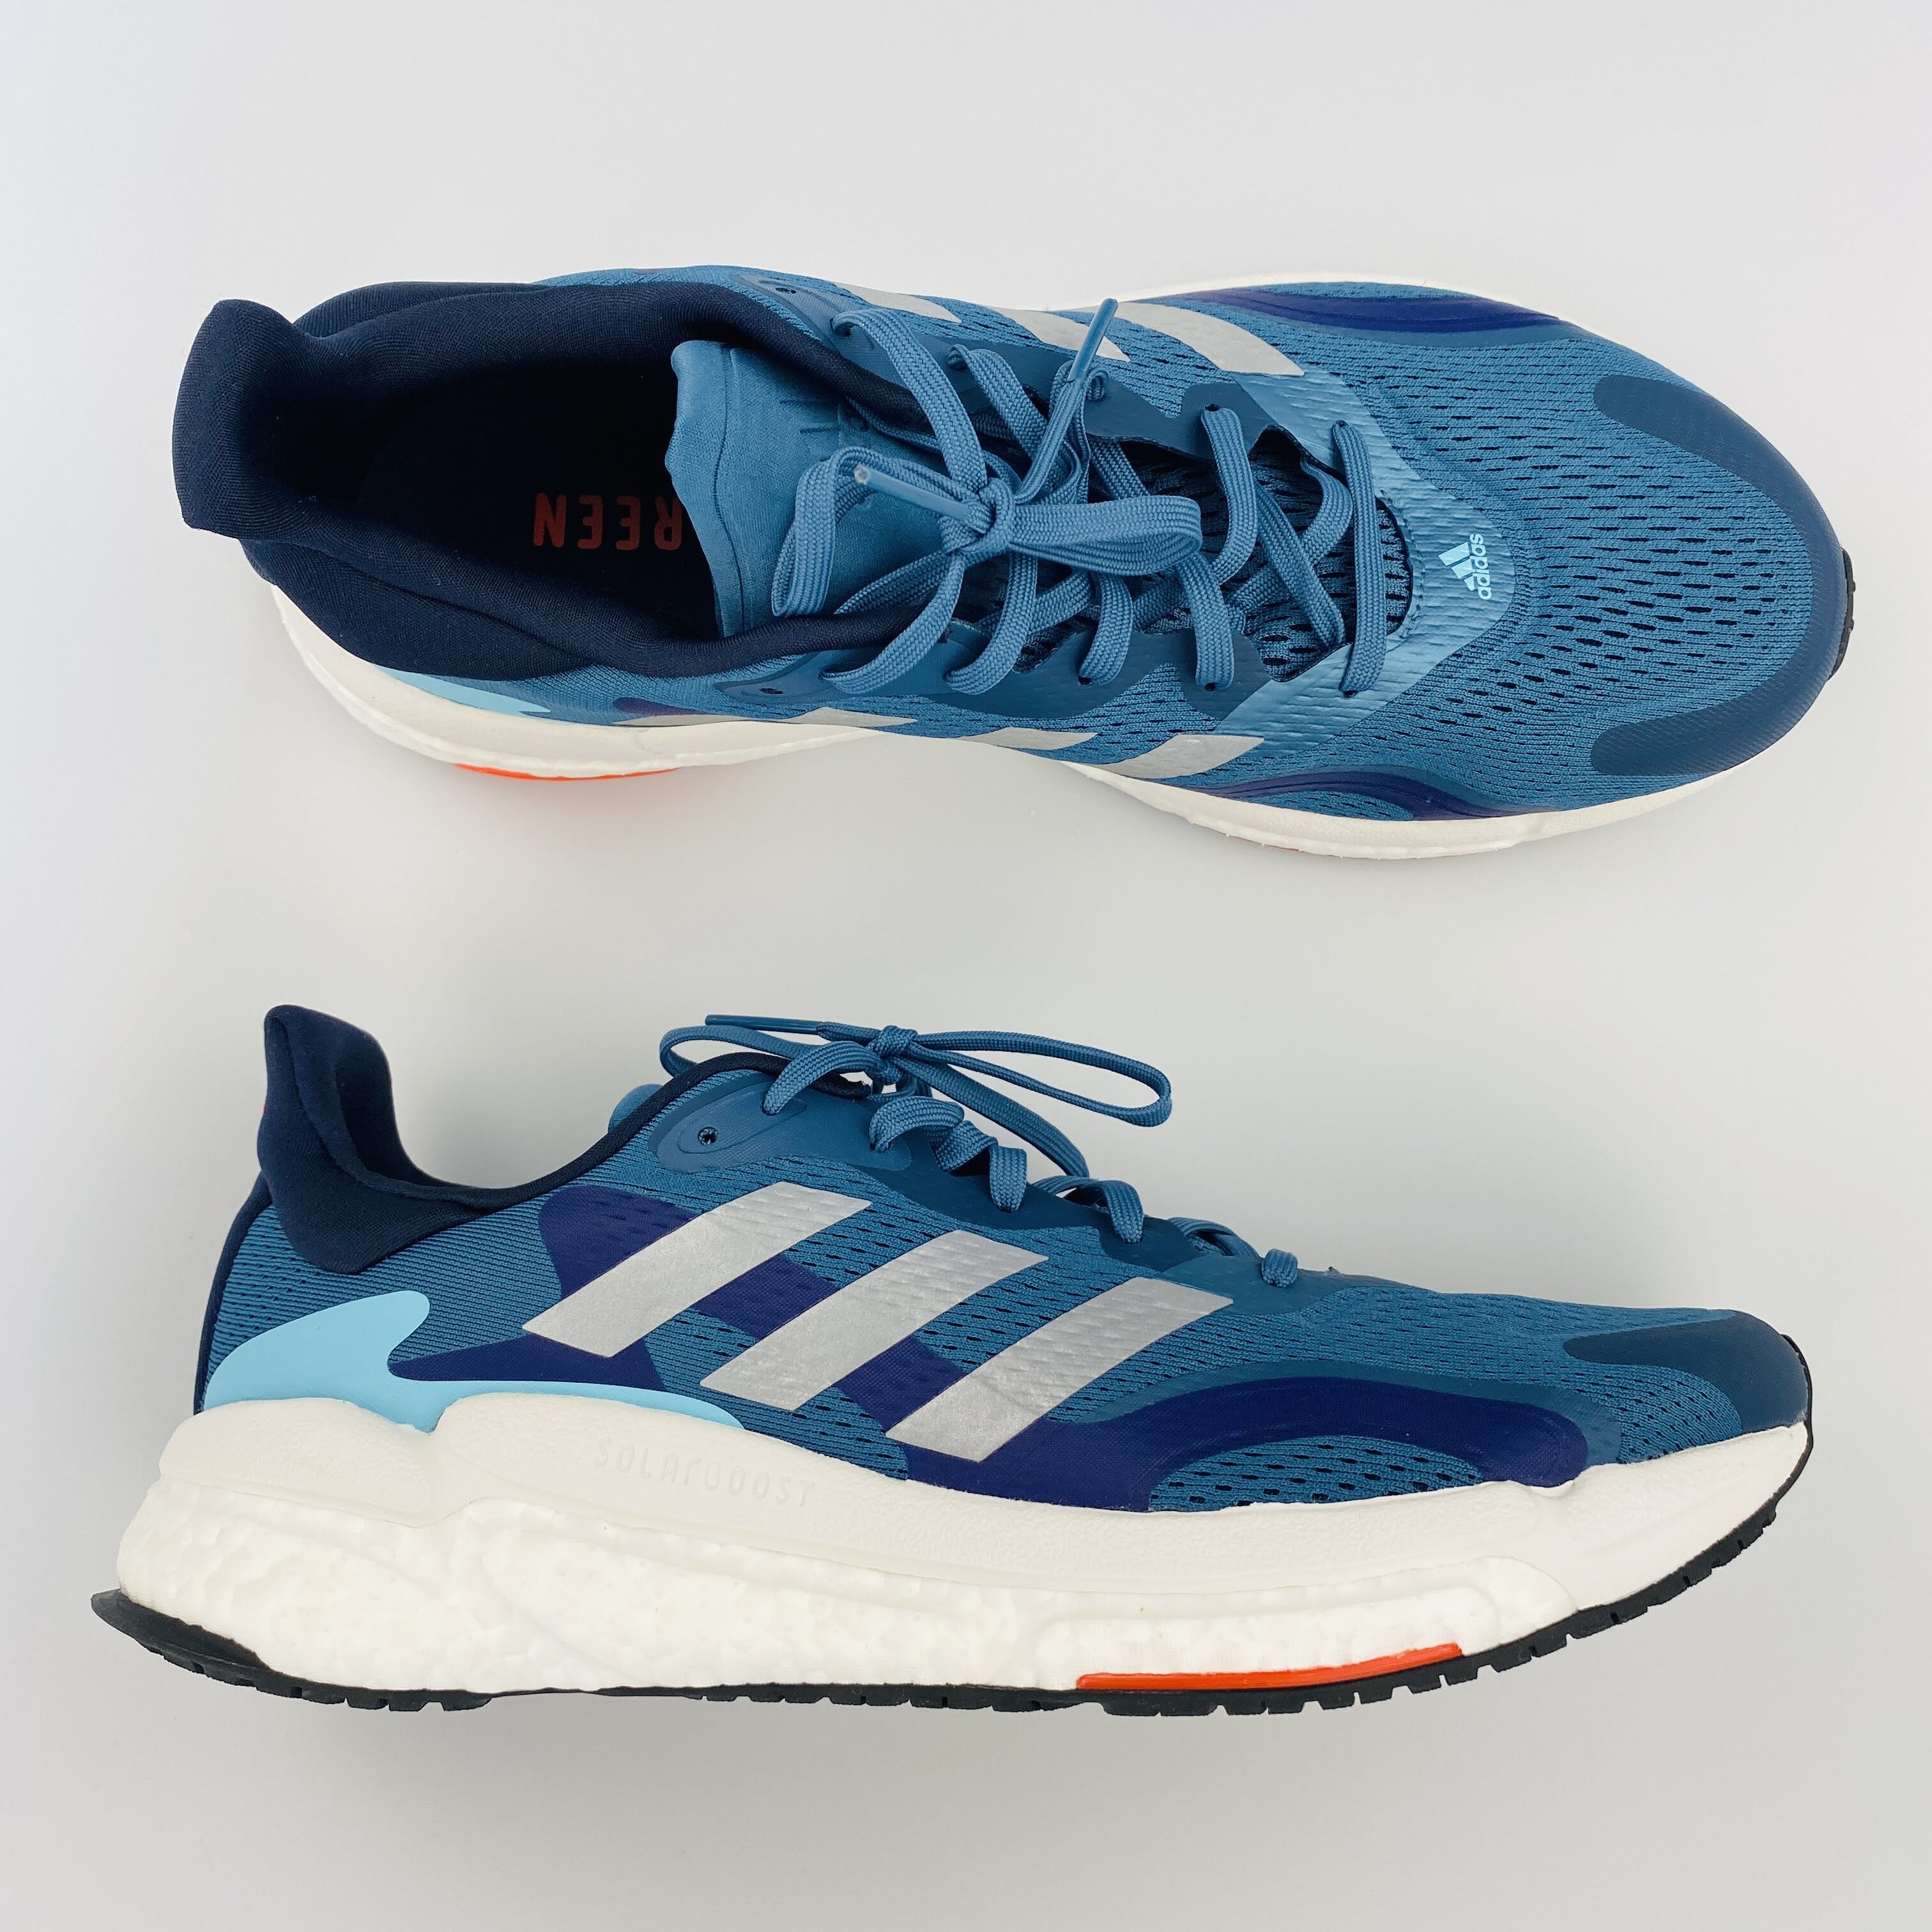 https://images.hardloop.fr/378570/adidas-solar-boost-3m-seconde-main-chaussures-running-homme-bleu-petrole-442-3.jpg?w=auto&h=auto&q=80